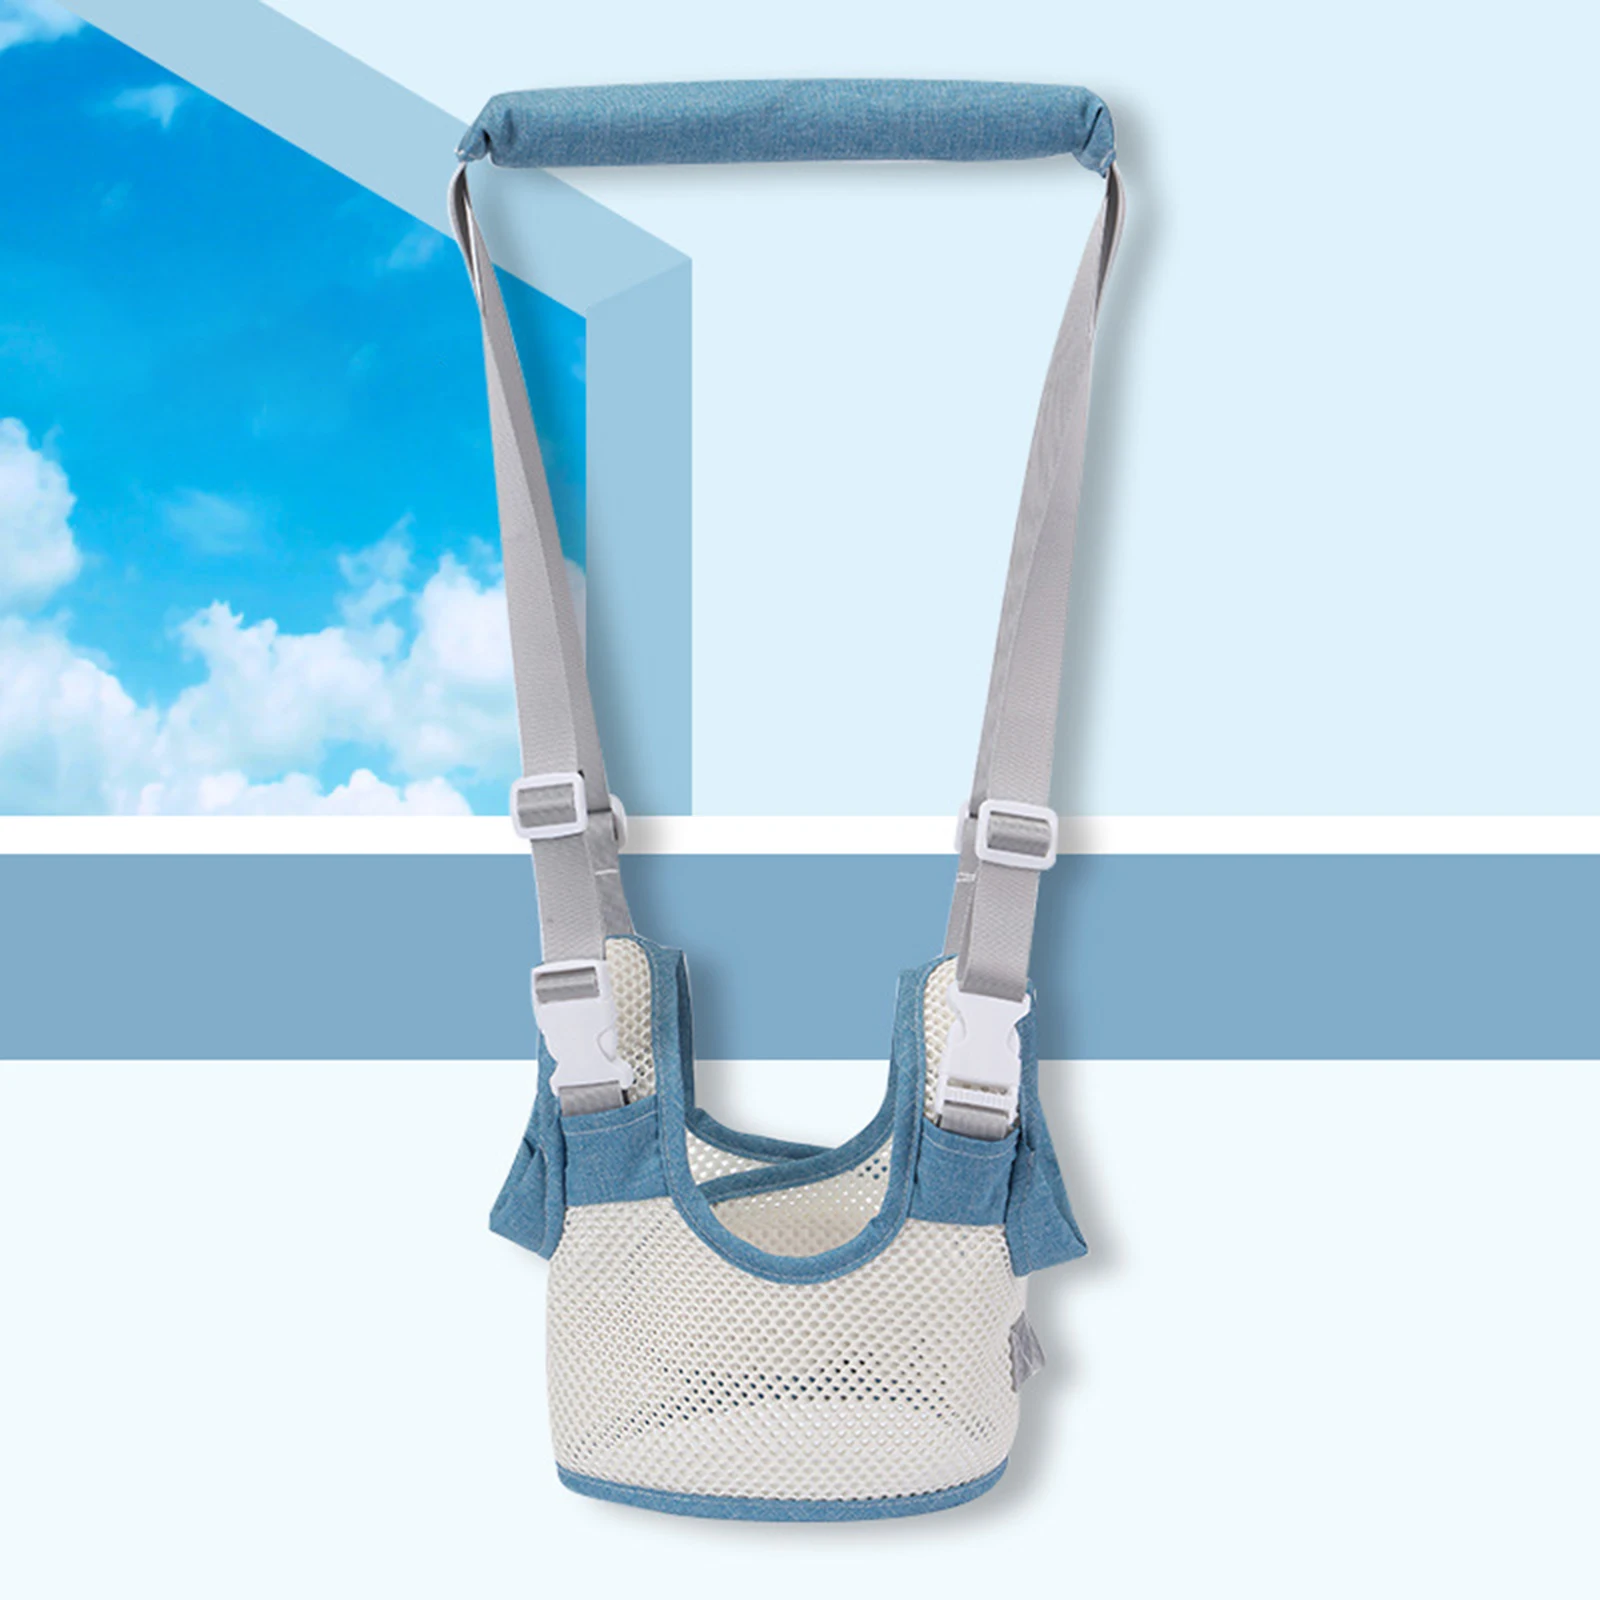 Kids Walking Harness, Learn to Walk Assistant, Handheld Baby Harness for Babies and Toddlers